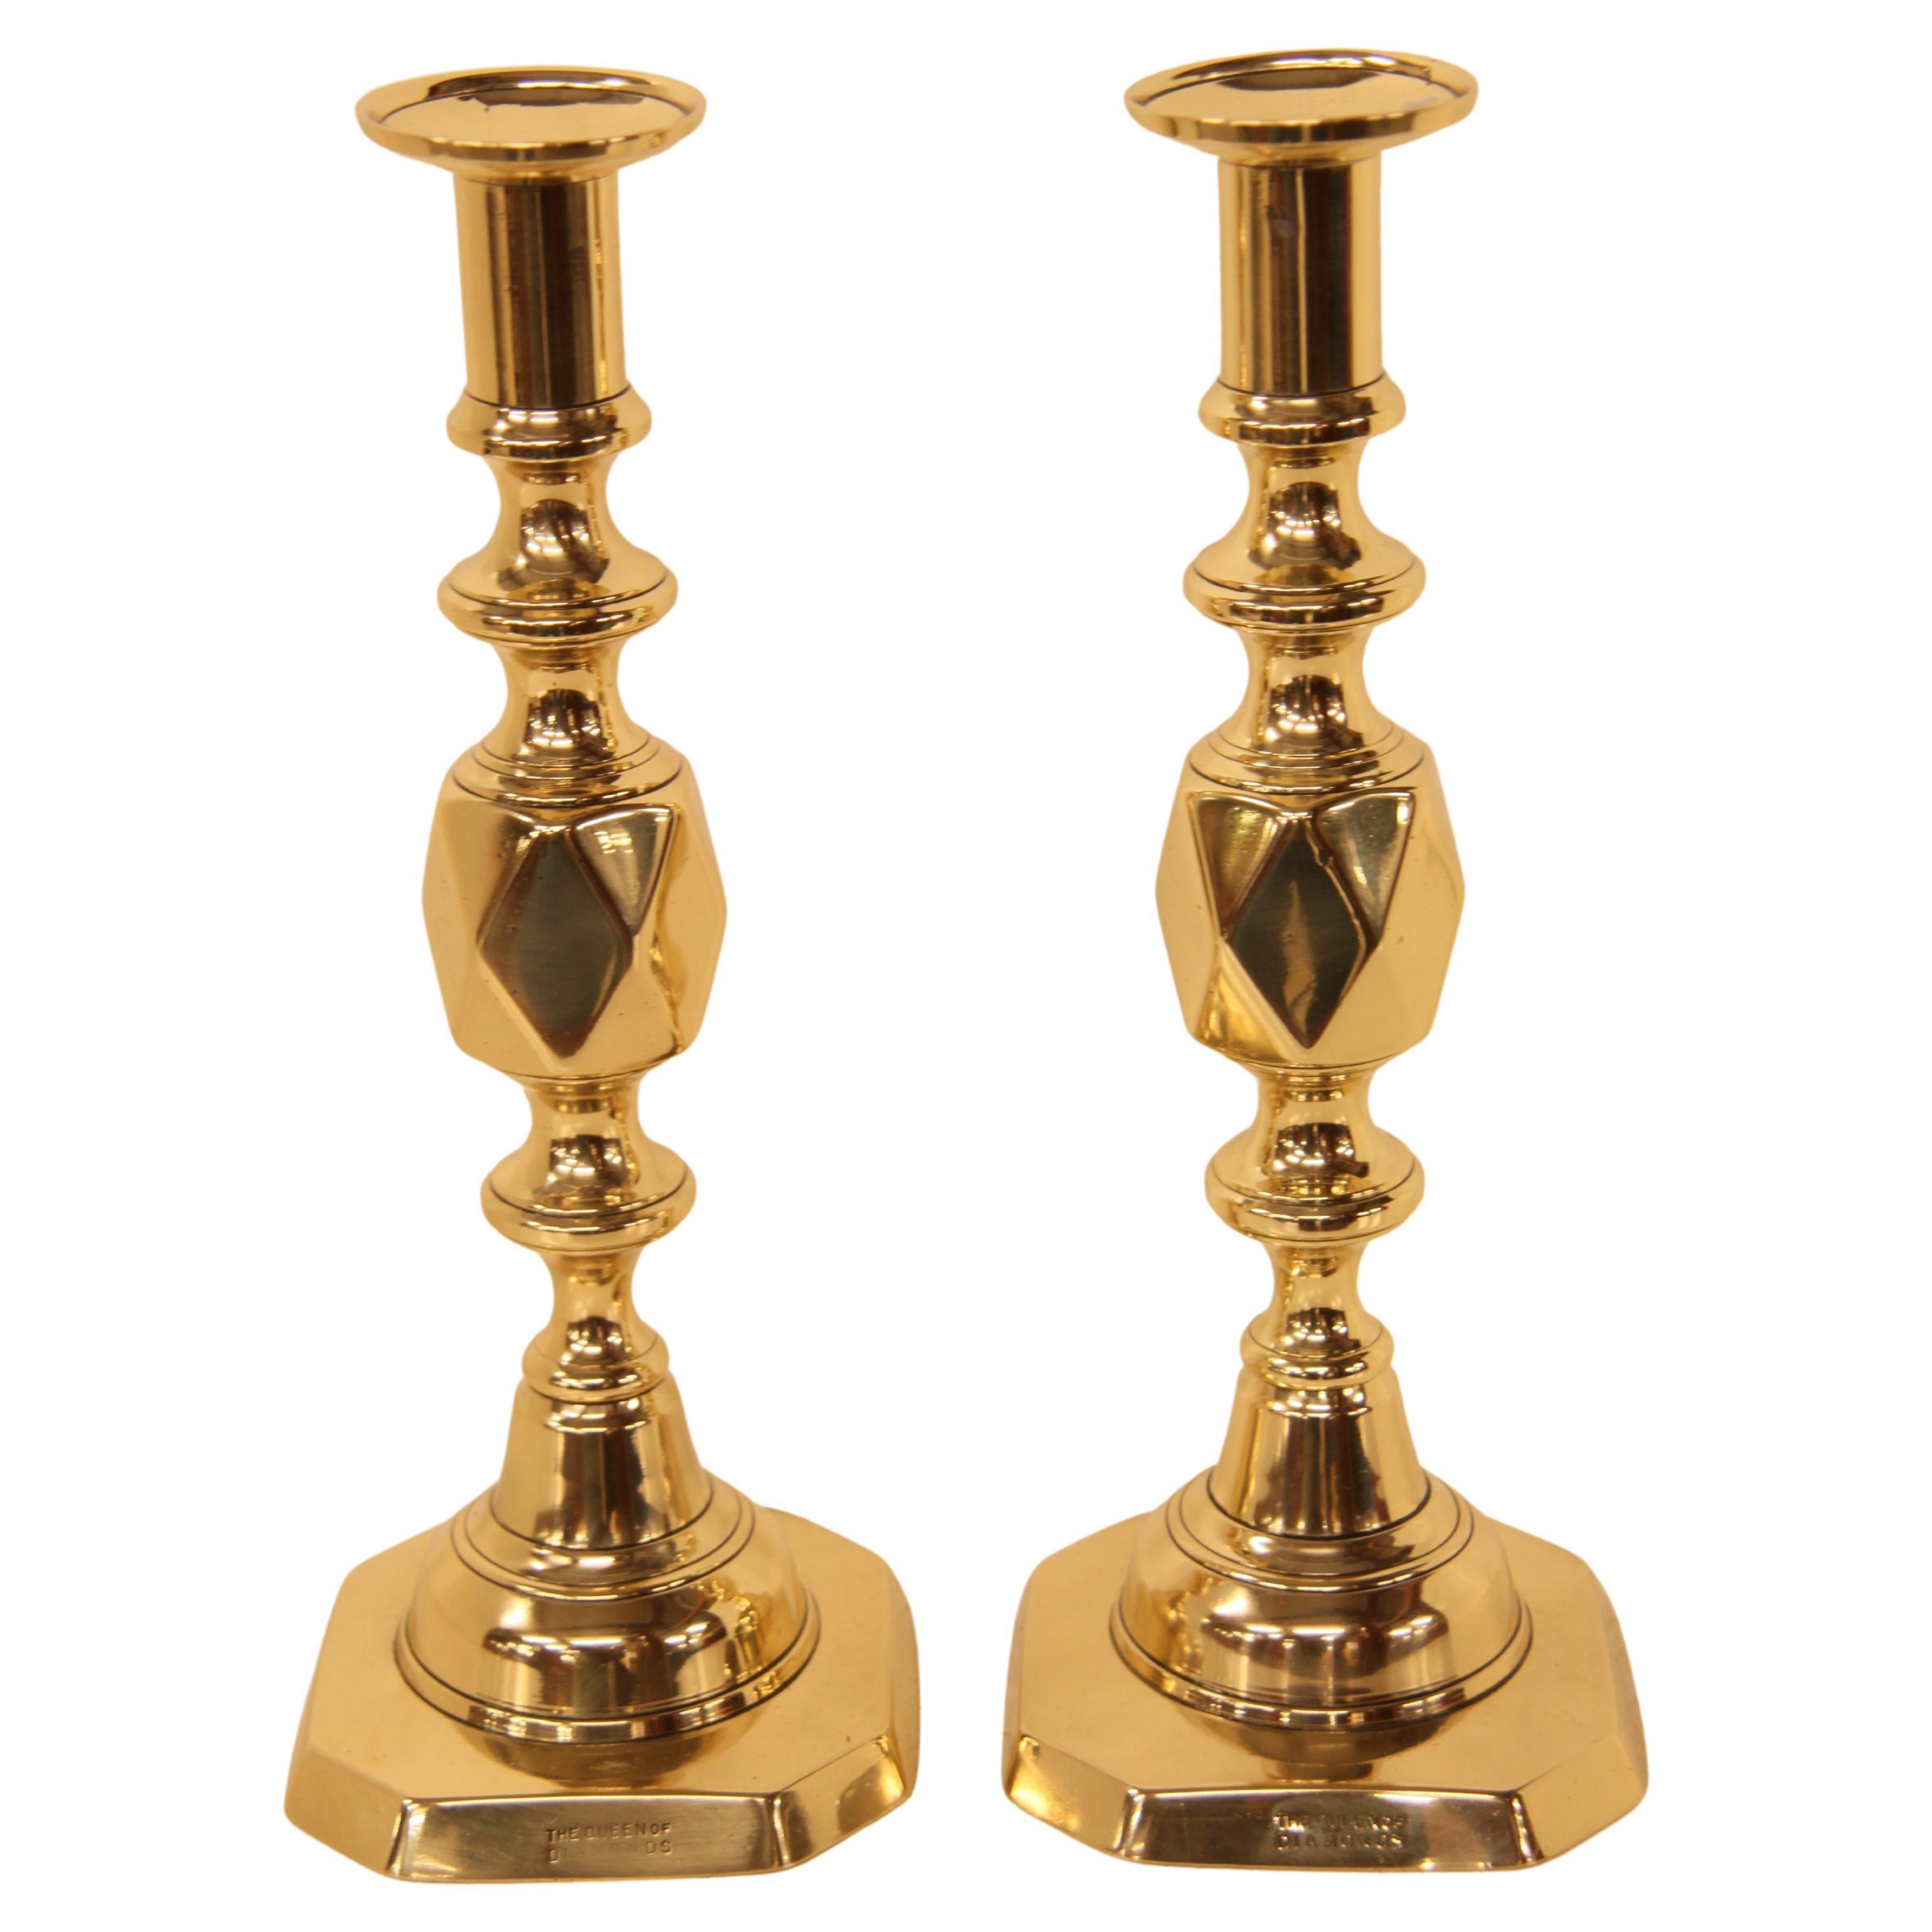 Pair of English brass '' The Diamond Princess'' candlesticks, this pair are from the famous diamond candlestick series that have been collected for generations ( serious collectors hunt for and find the entire series) From smallest to largest they